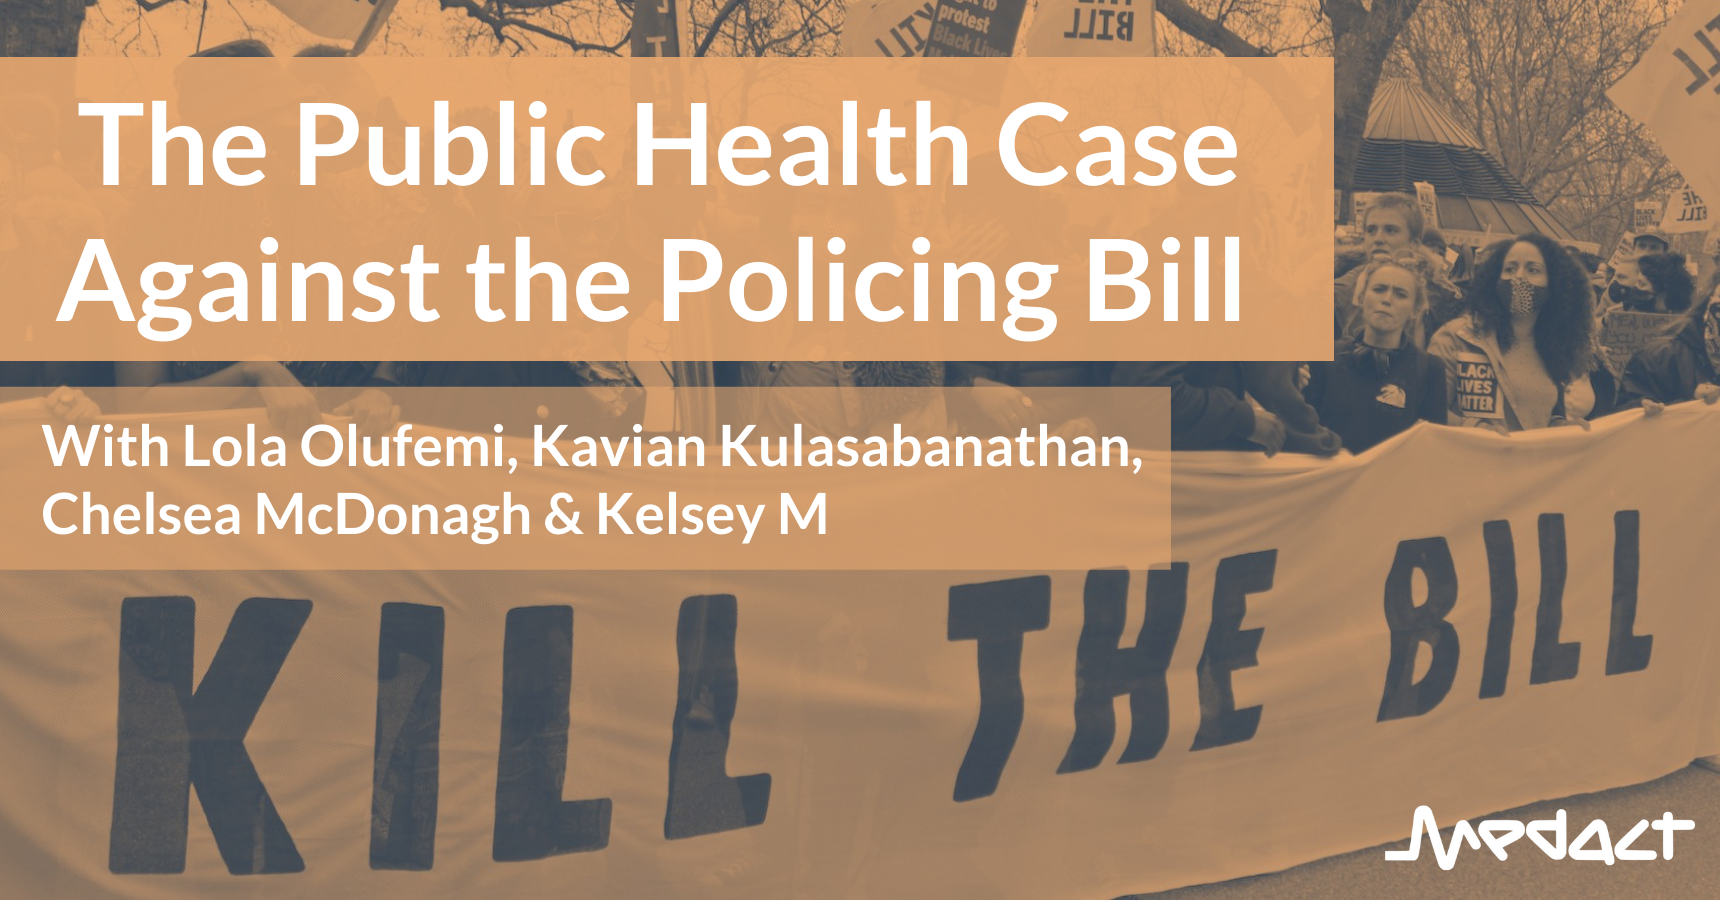 Briefing launch: The Public Health Case Against the Policing Bill